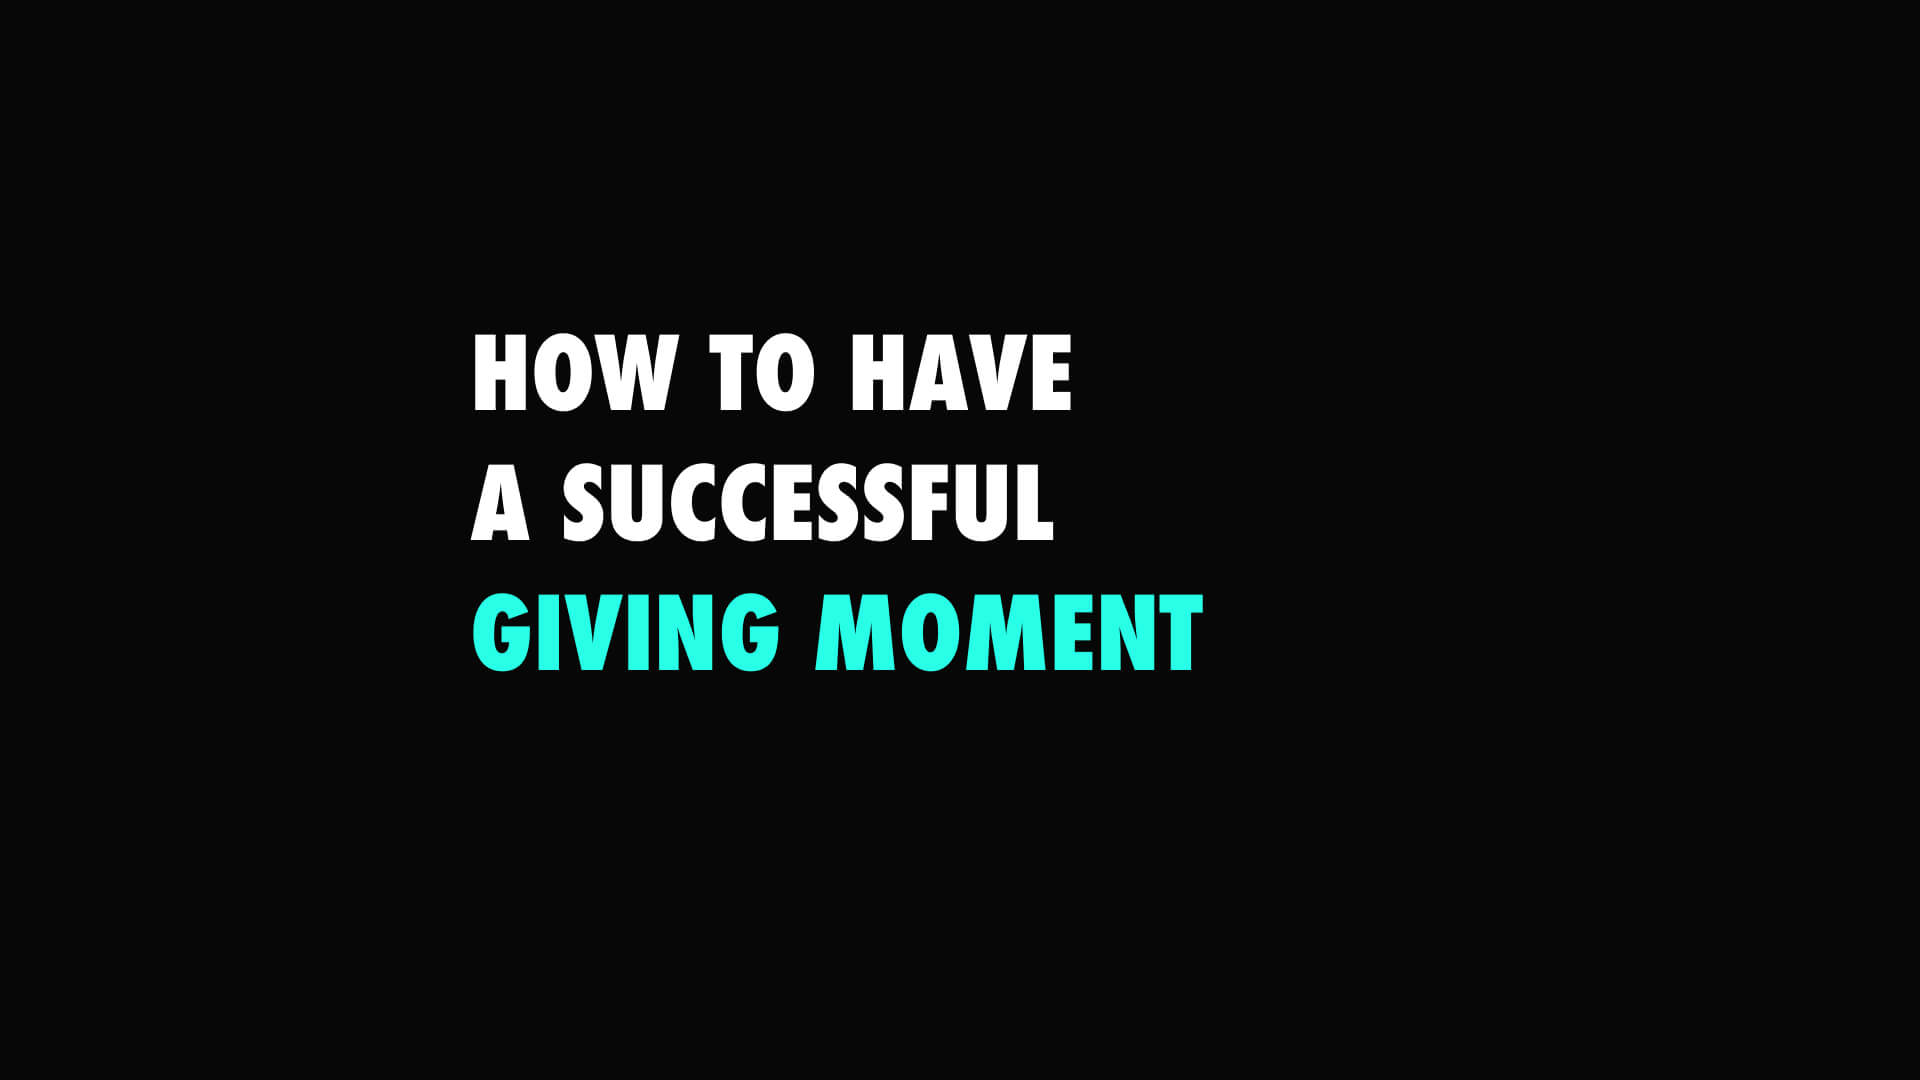 The Giving Moment